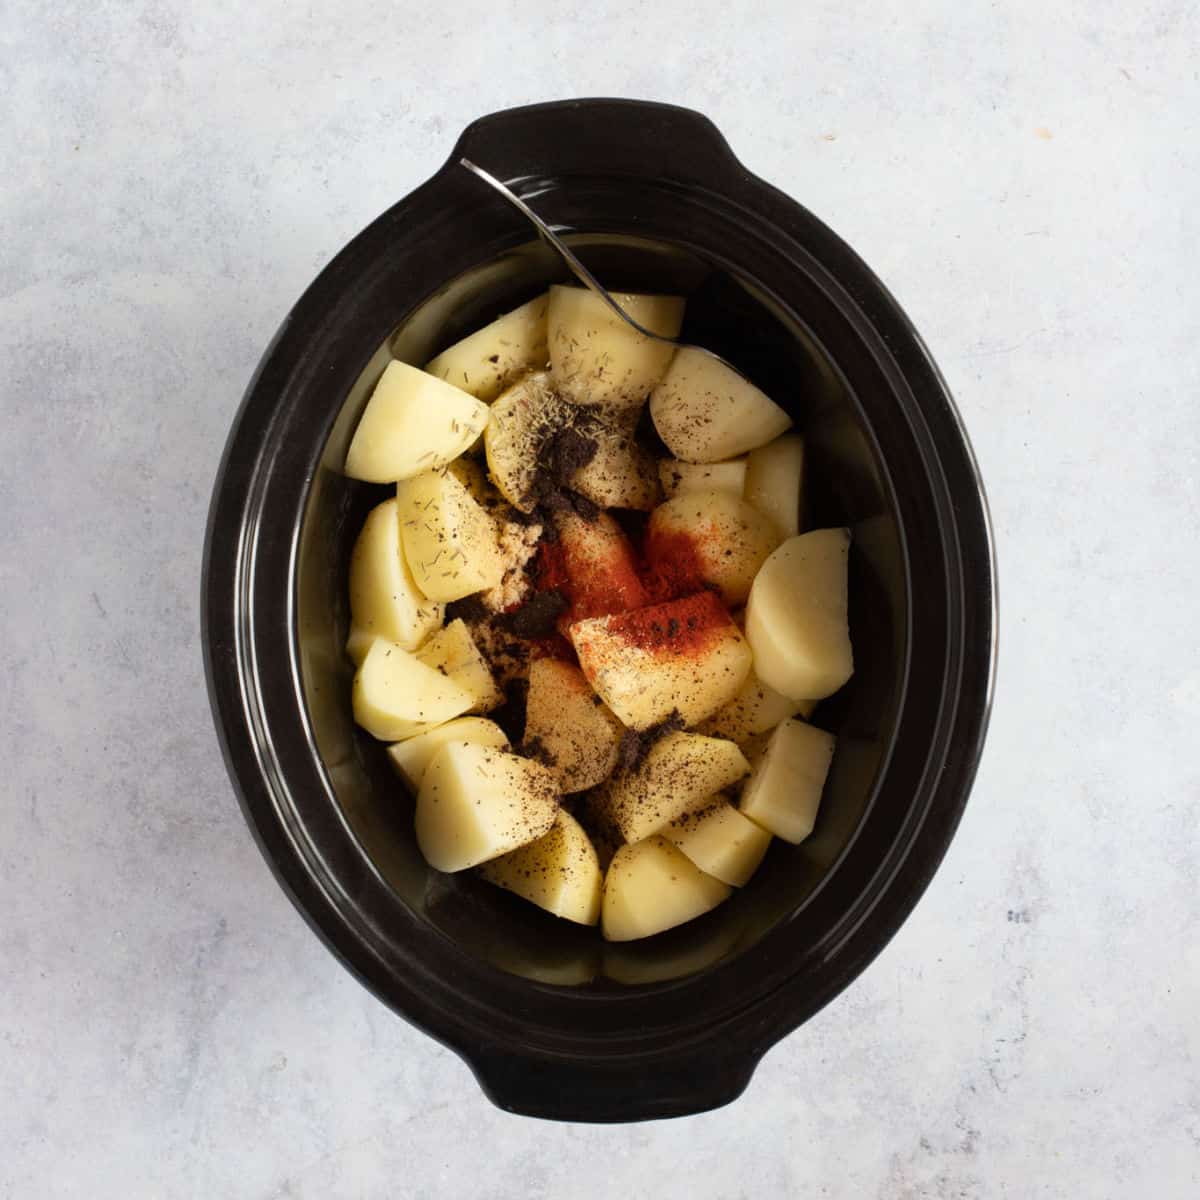 Potatoes in a slow cooker.